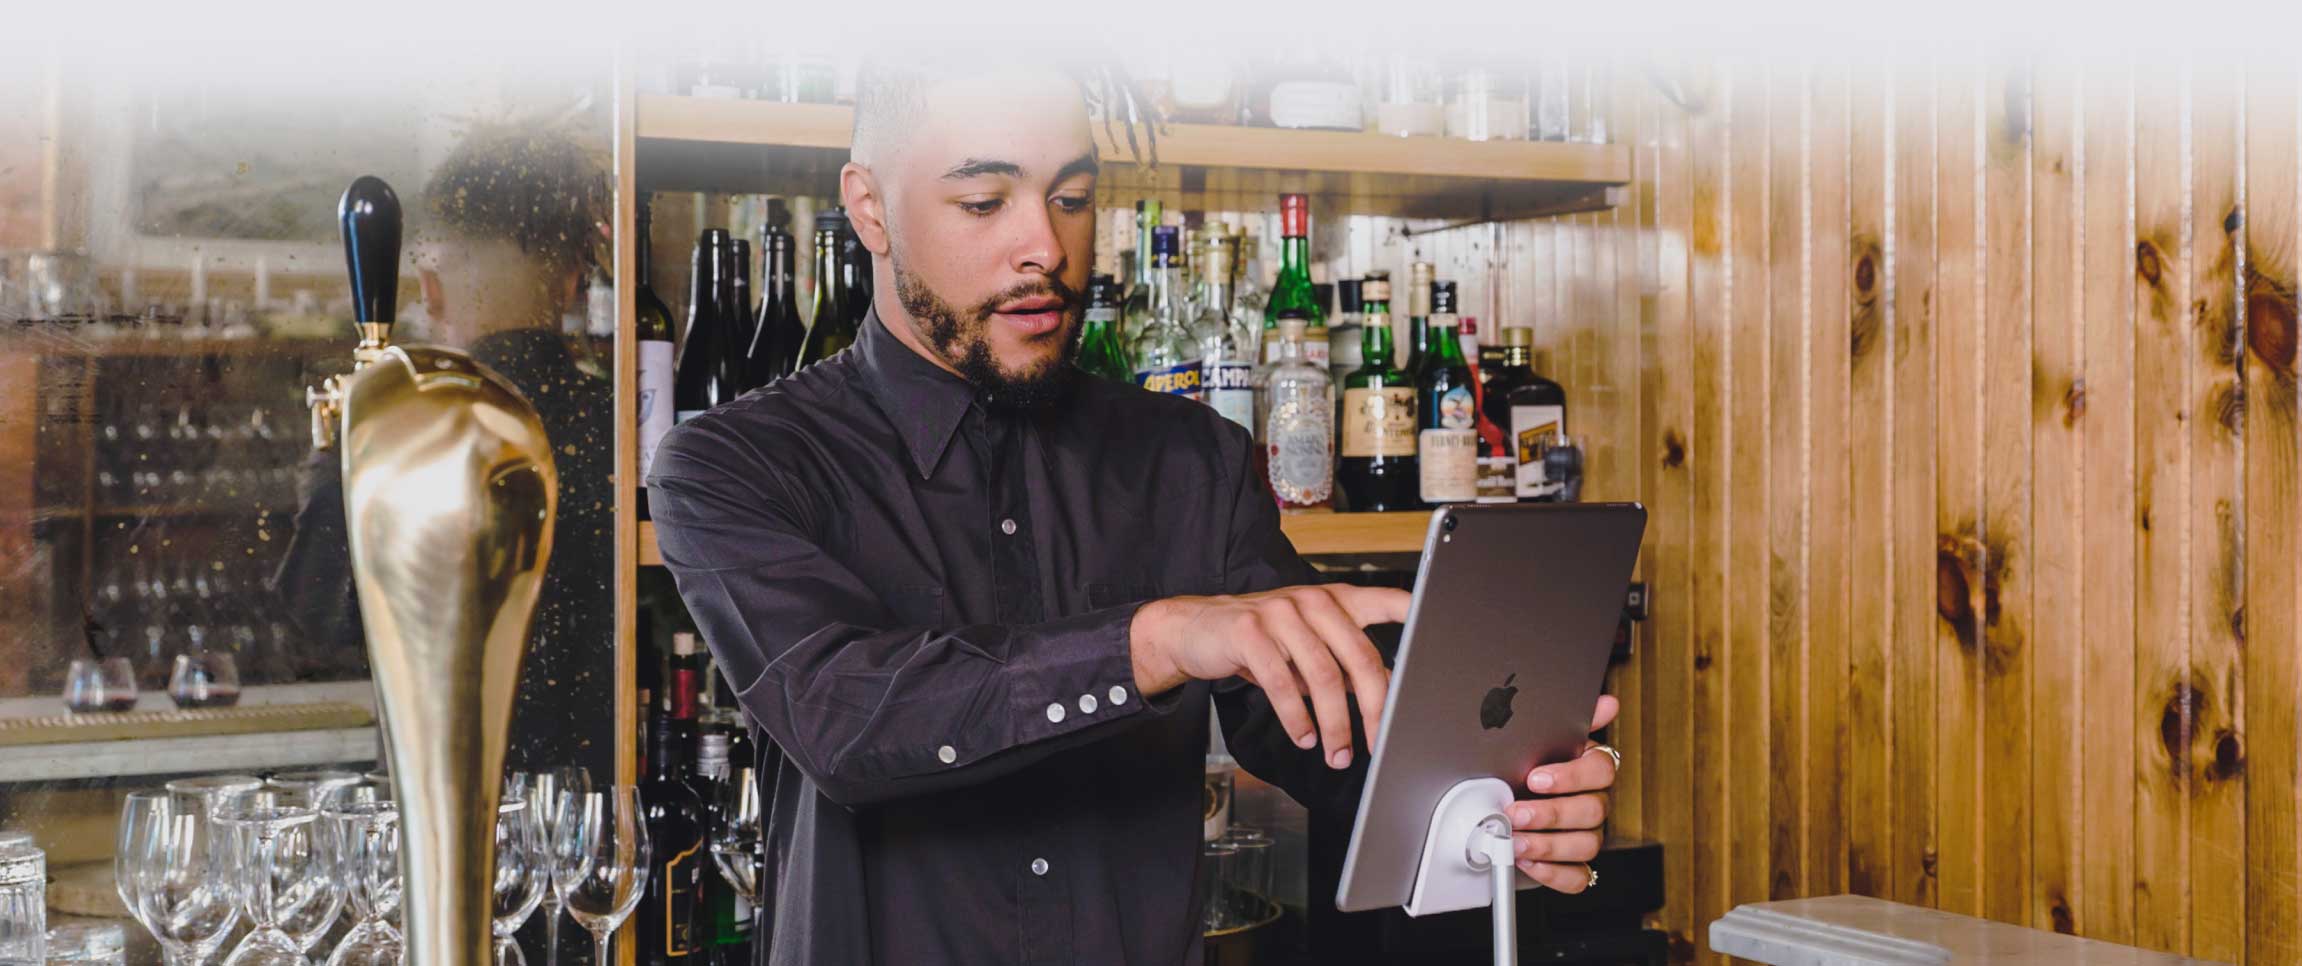 Restaurant employee working with TouchBistro technology on an ipad